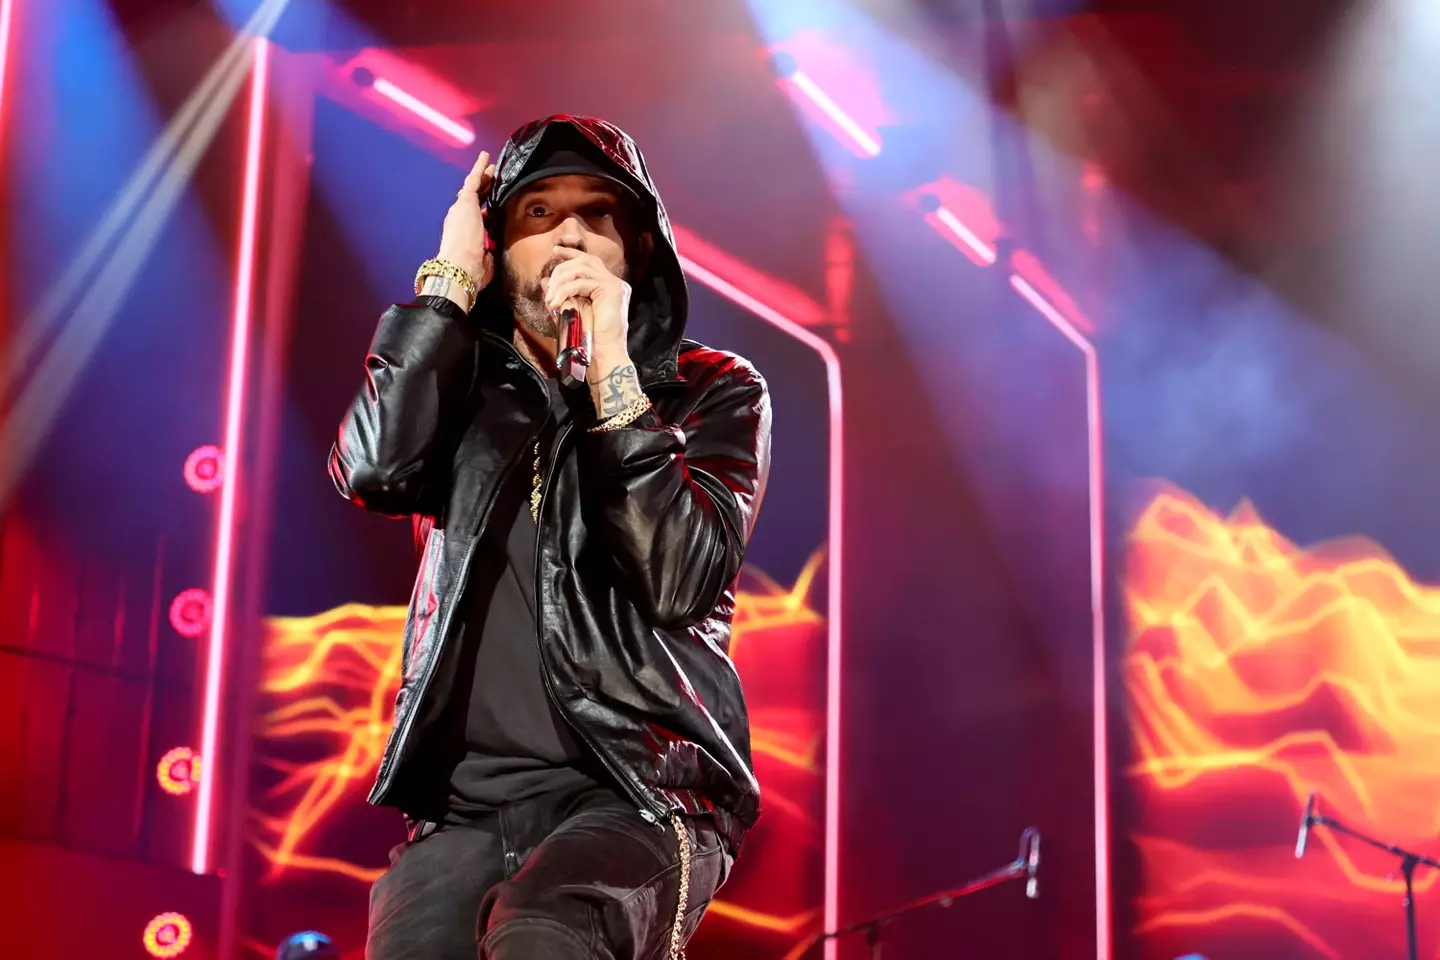 Rap God Eminem has been one of the most popular music artists in the world for the past 20 years.